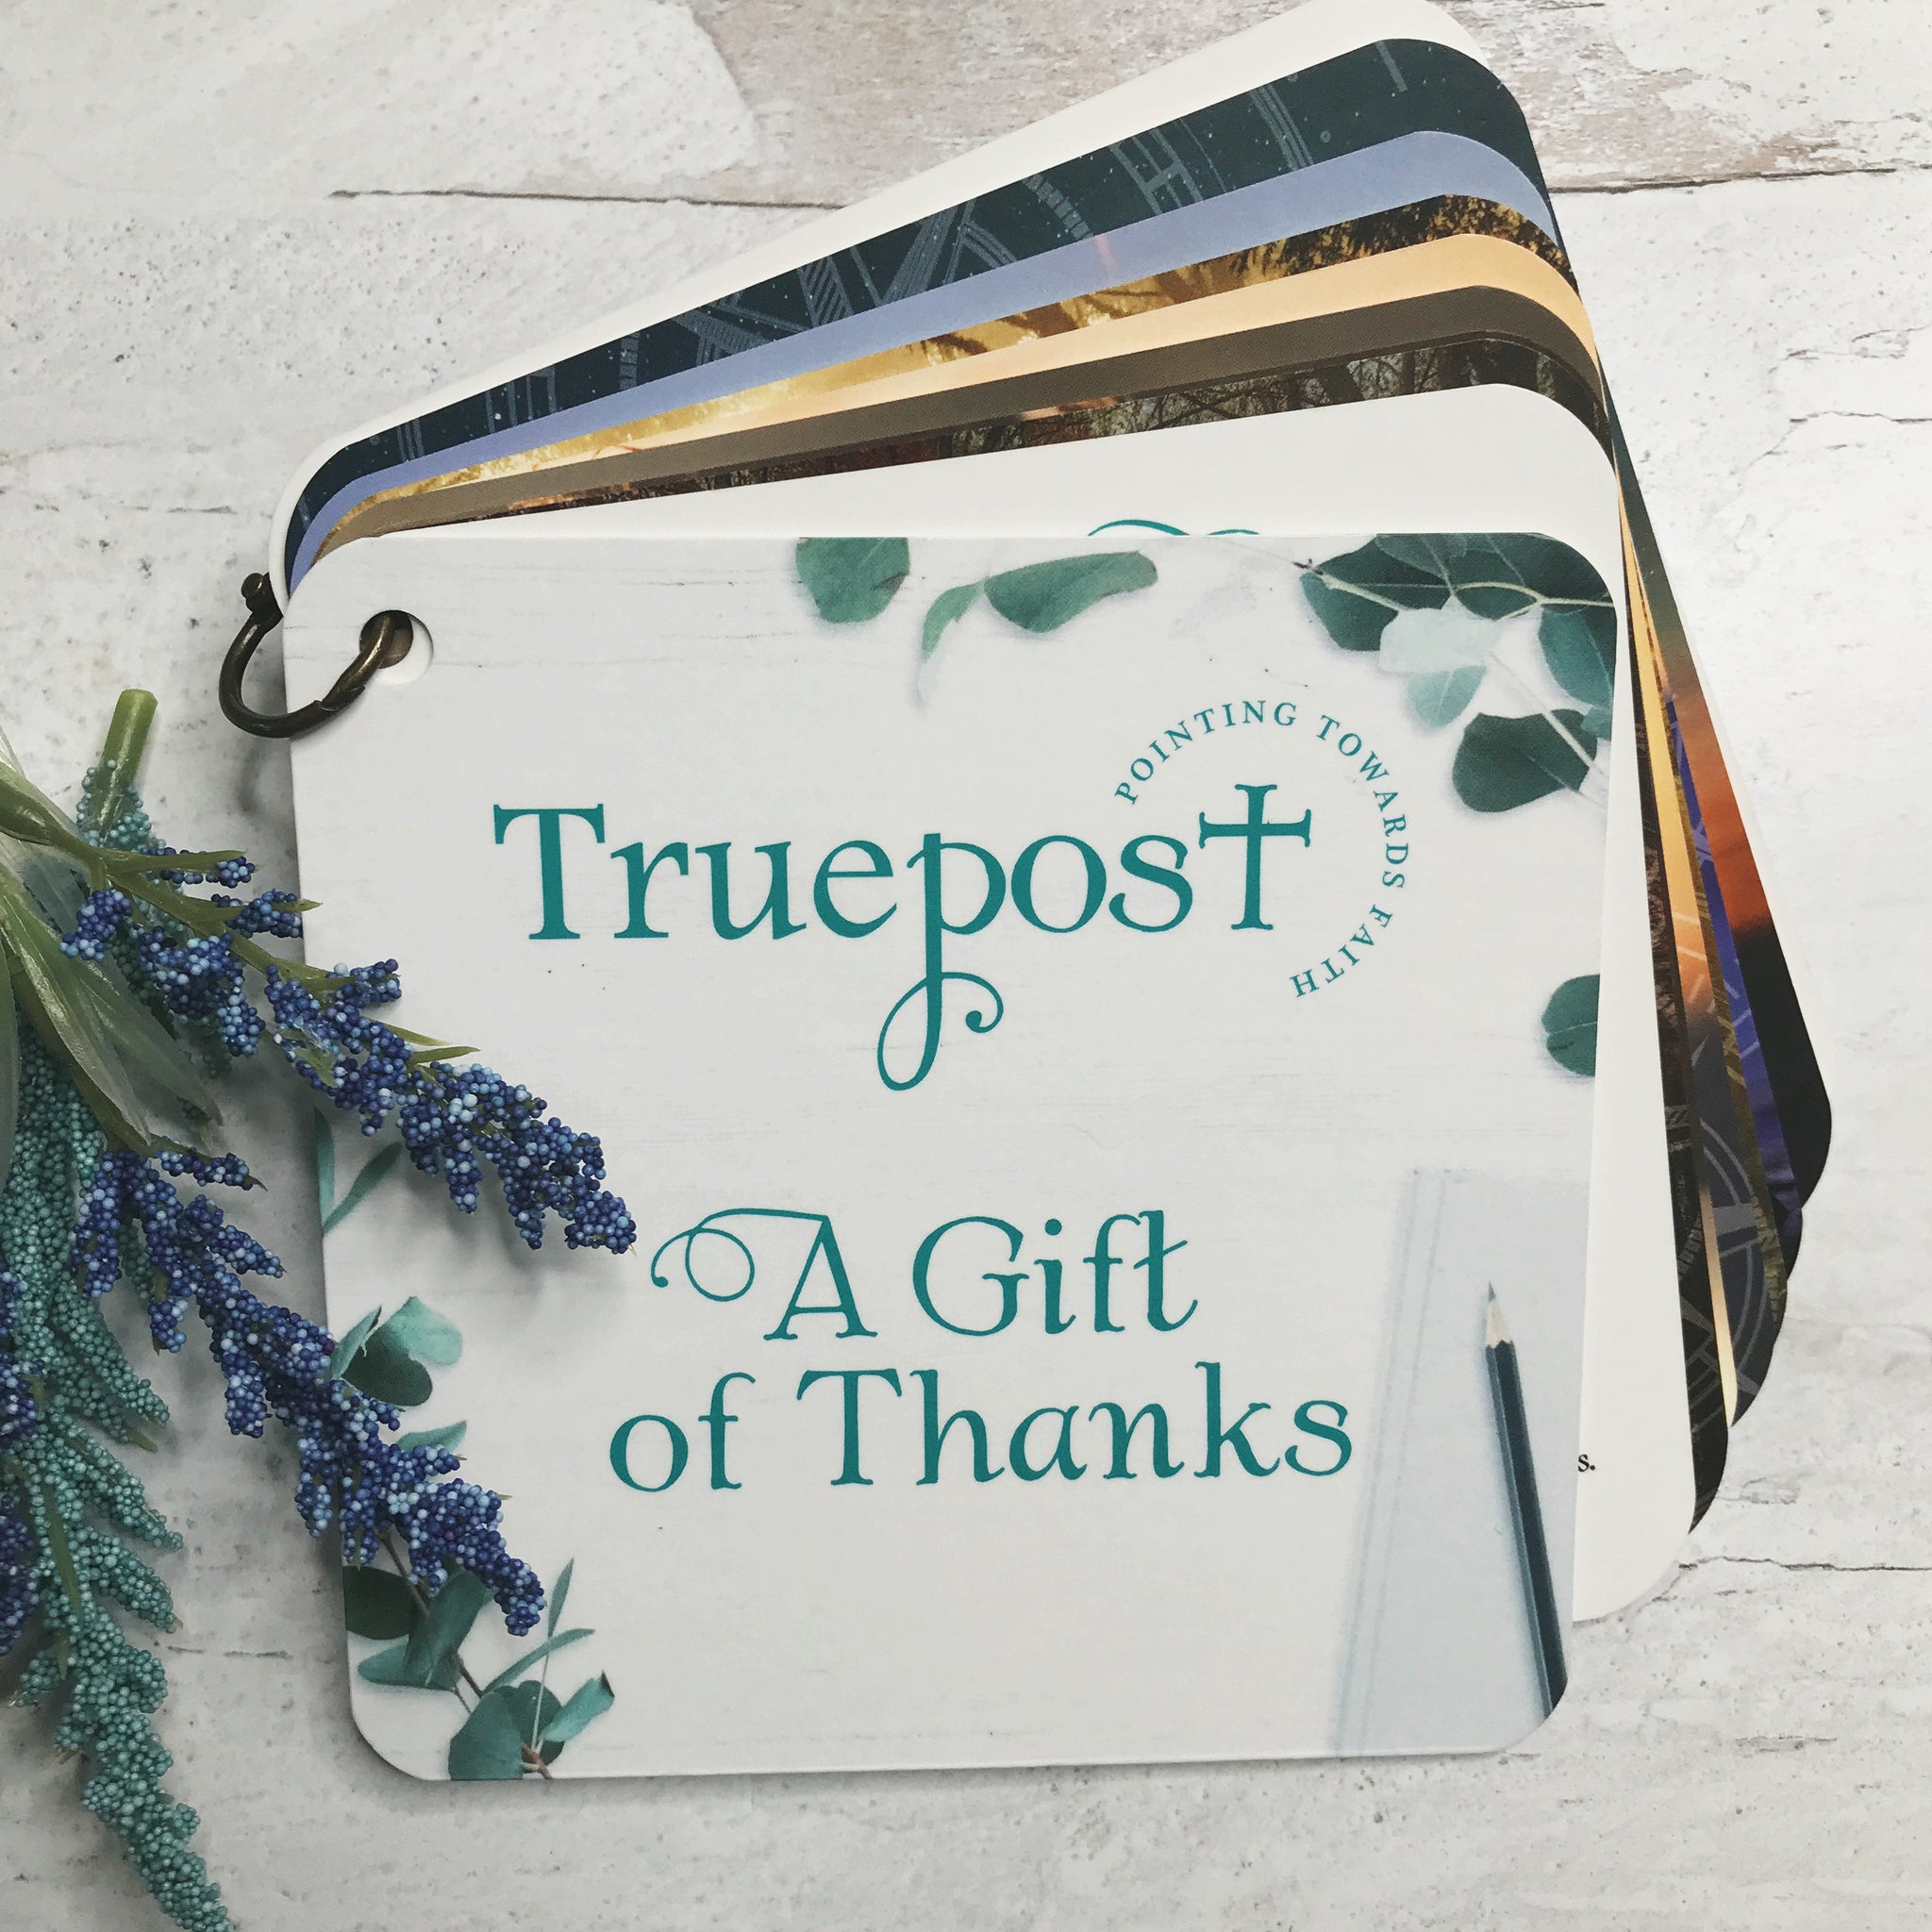 A Gift of thanks scripture devotional card set with photo of greenery.